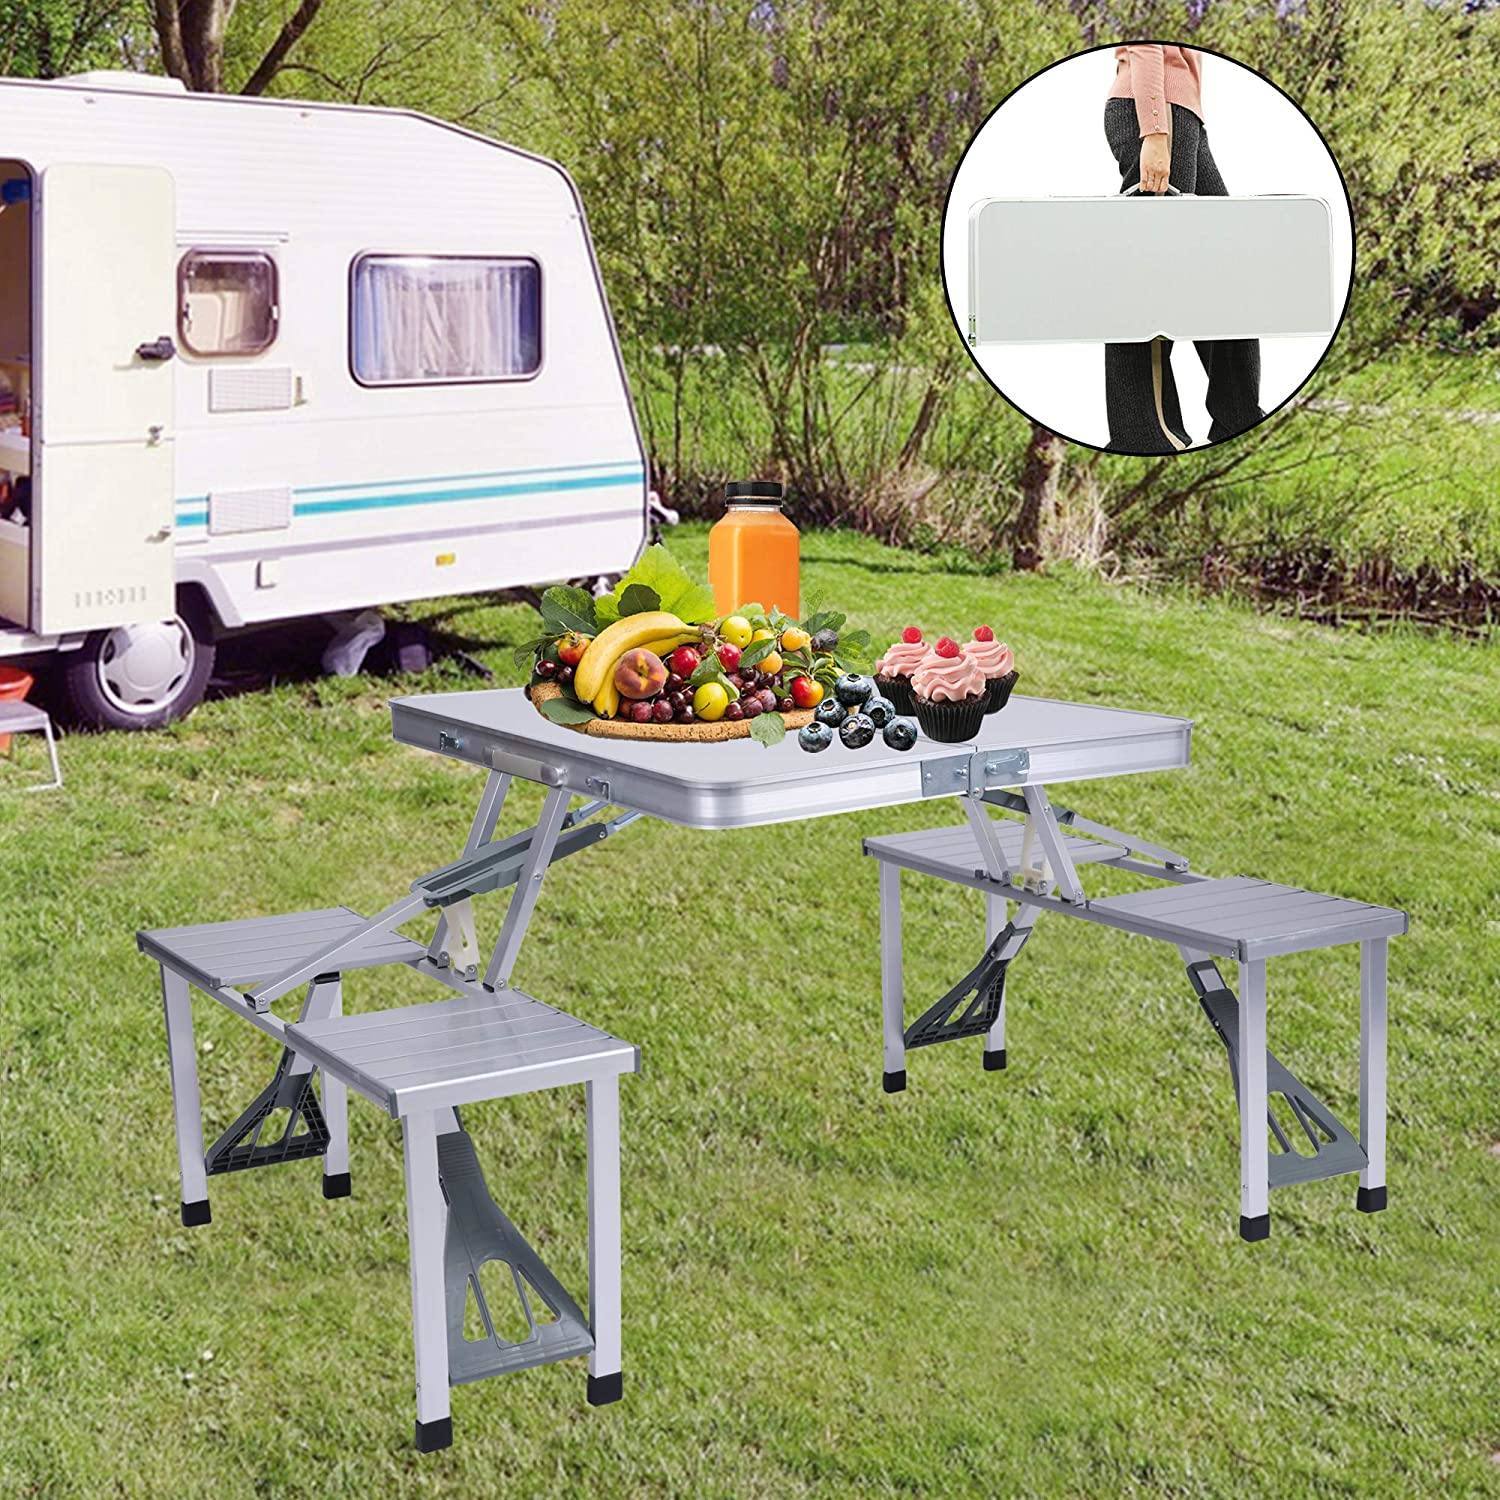 Picnic Table Folding Camping Table Chair Set with 4 Seats Chairs and Umbrella Hole - image 4 of 5